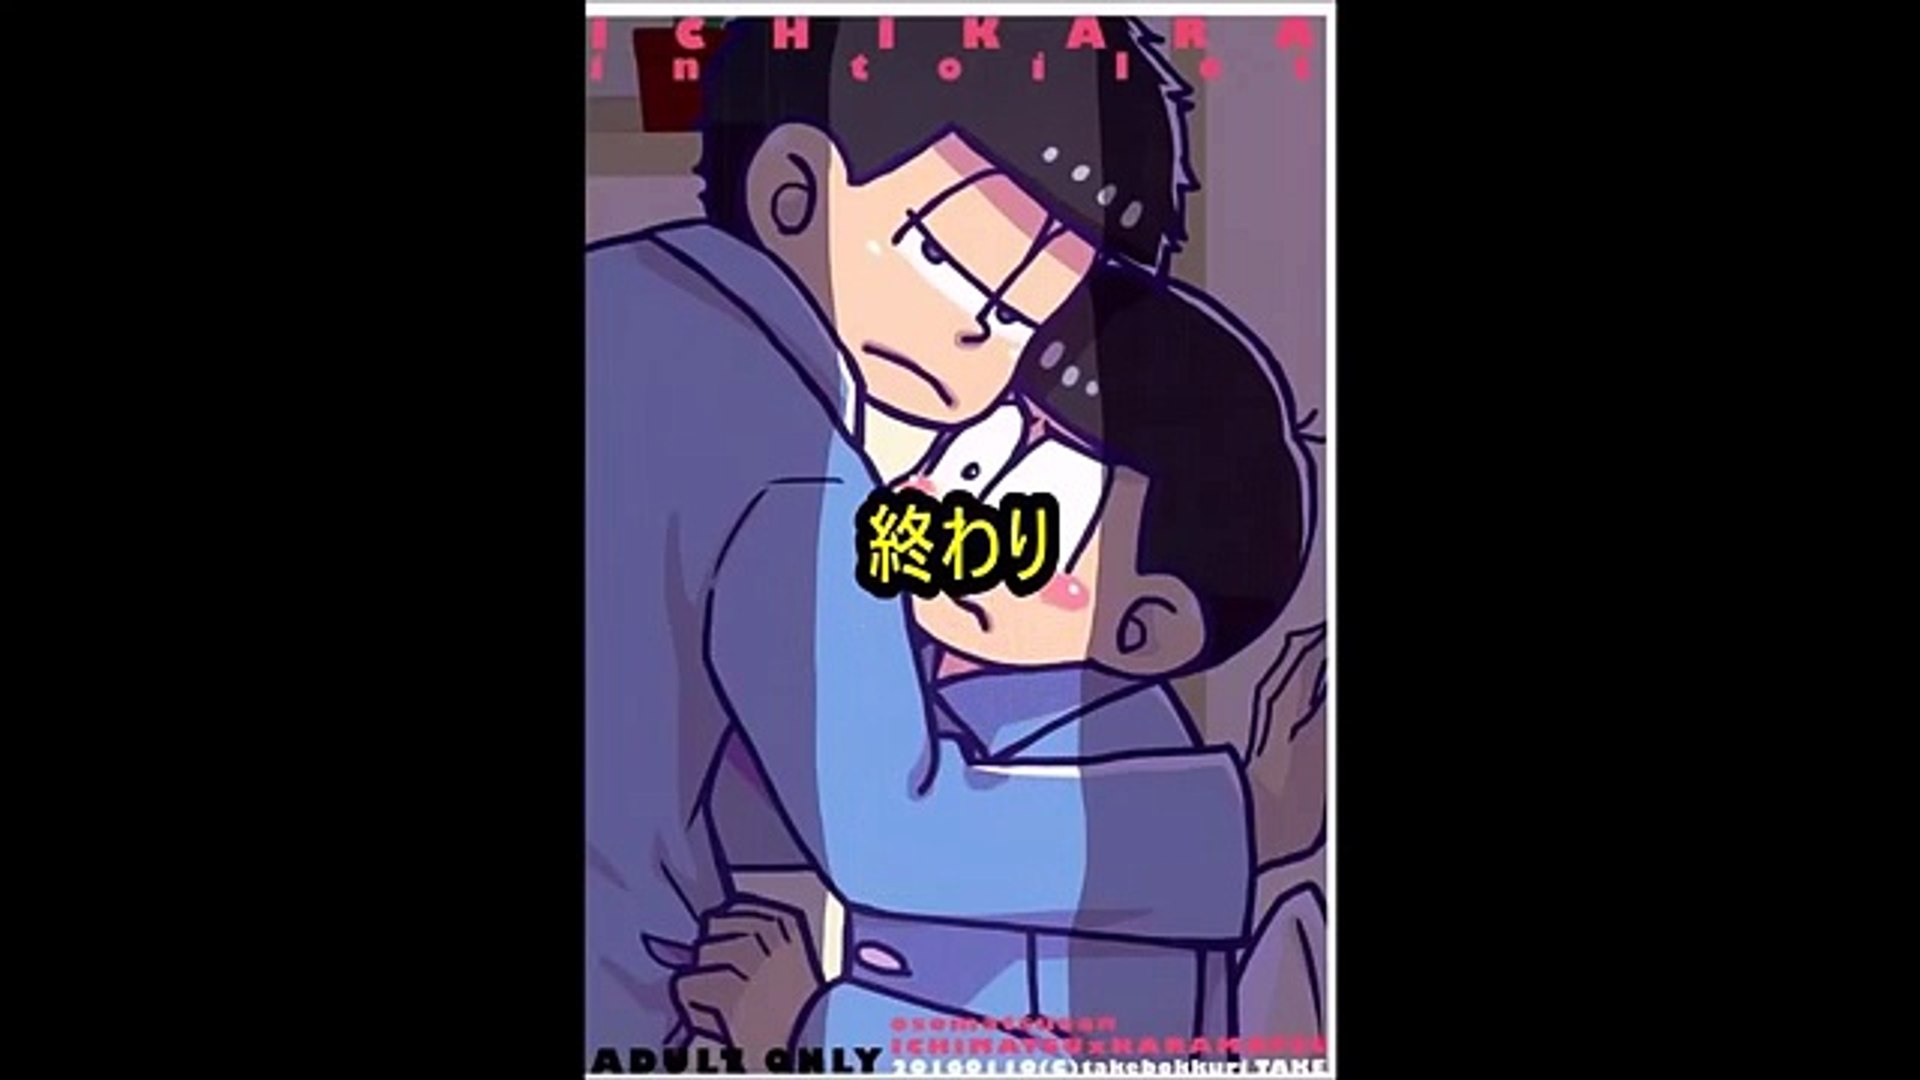 ｂｌ漫画 一松 カラ松 いちからinトイレット Mp4 Dailymotion Video